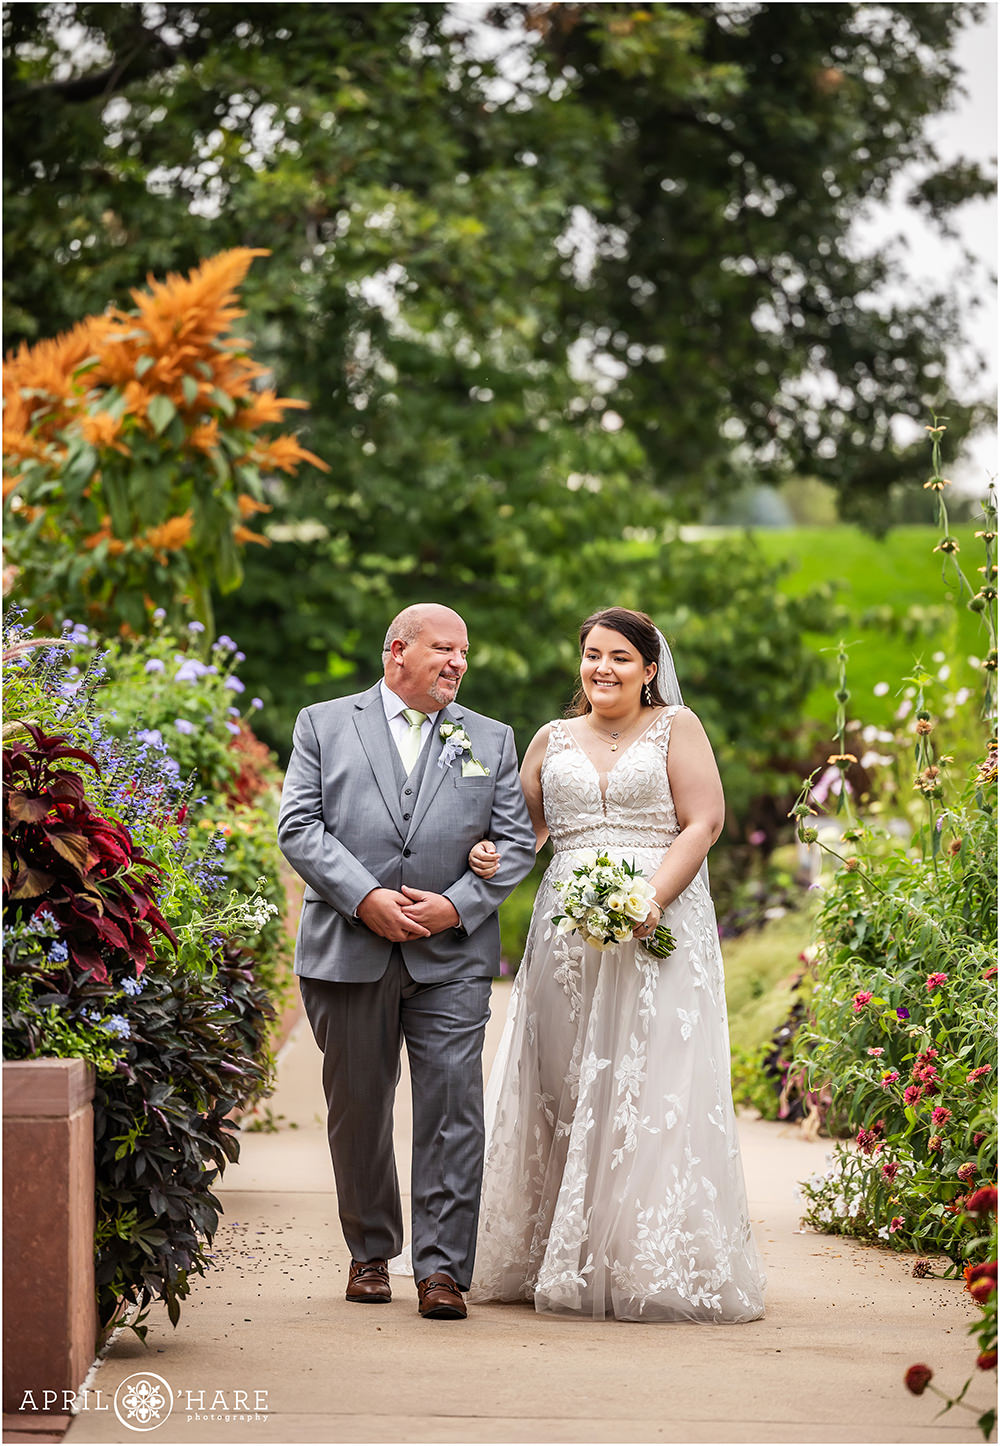 Father walks his daughter down the aisle in the Annuals Garden at Denver Botanic Gardens